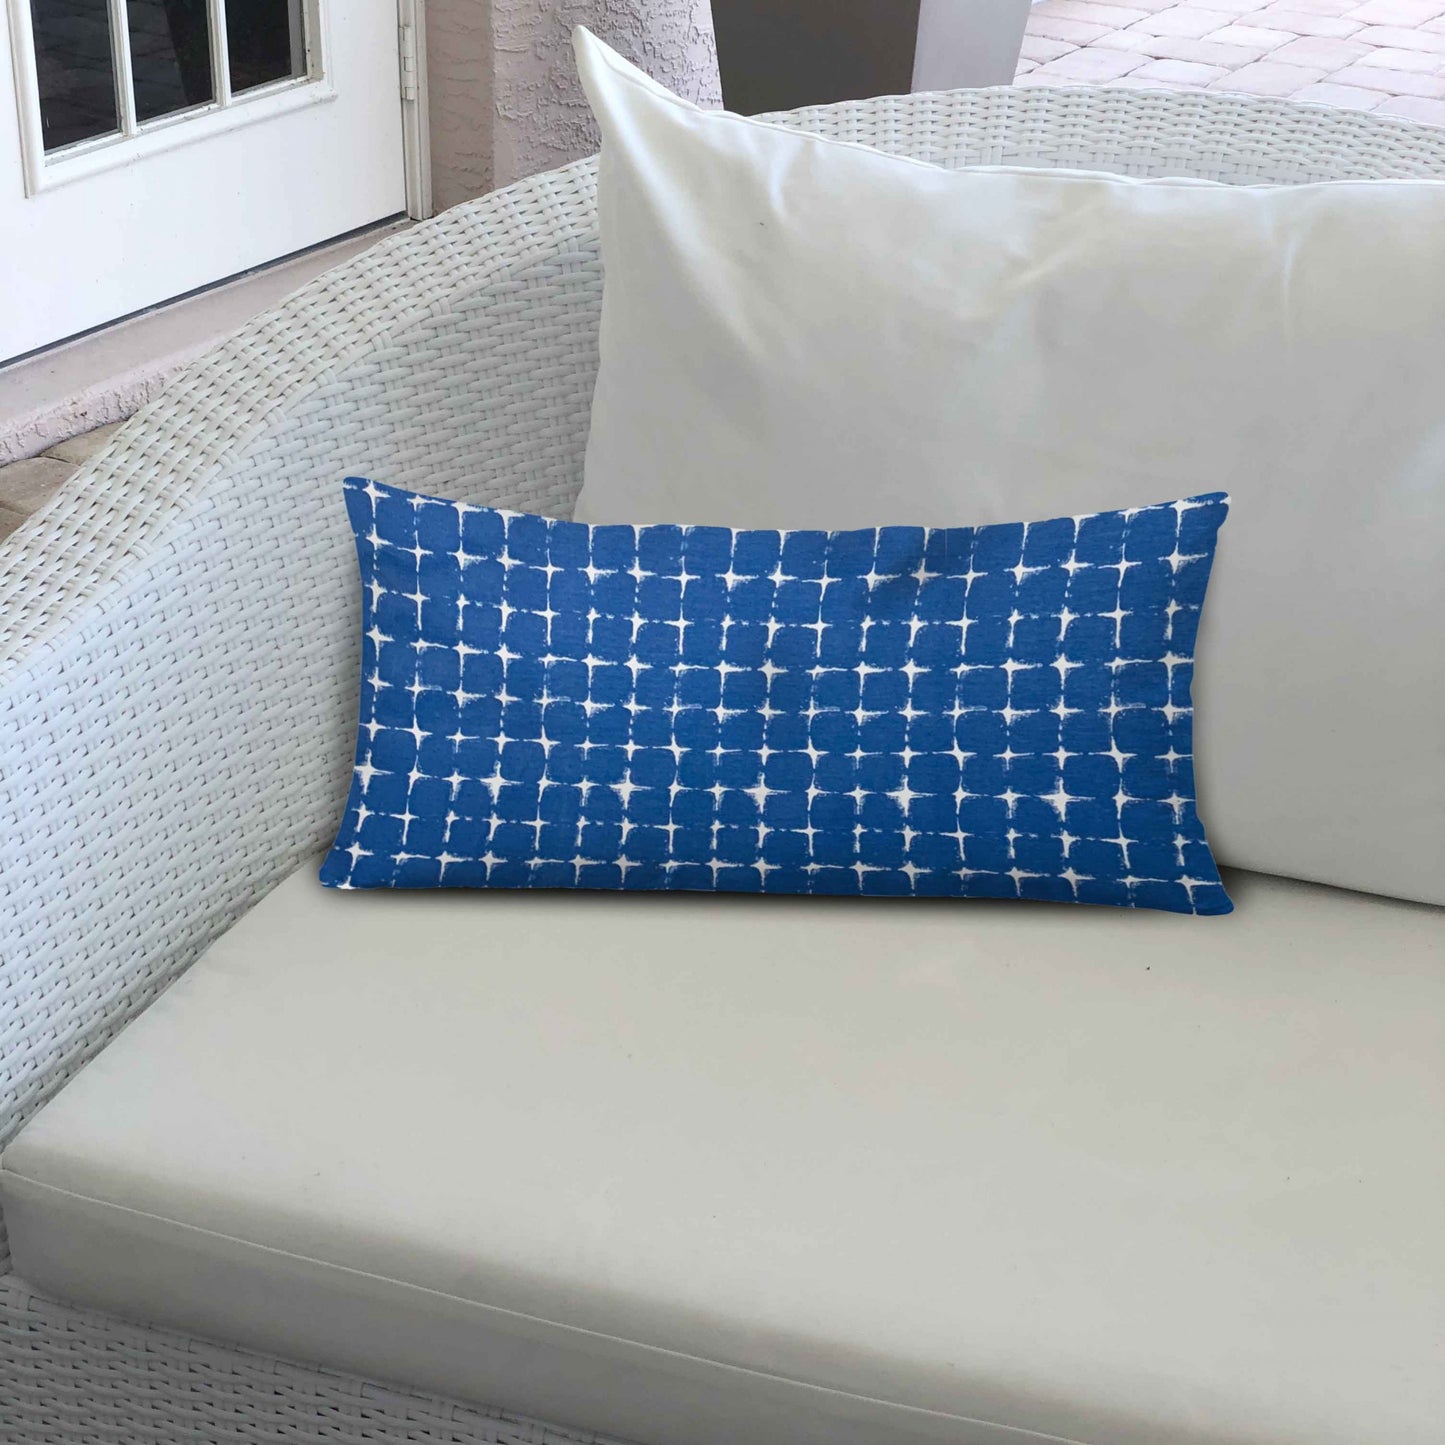 24" X 36" Blue And White Zippered Gingham Lumbar Indoor Outdoor Pillow